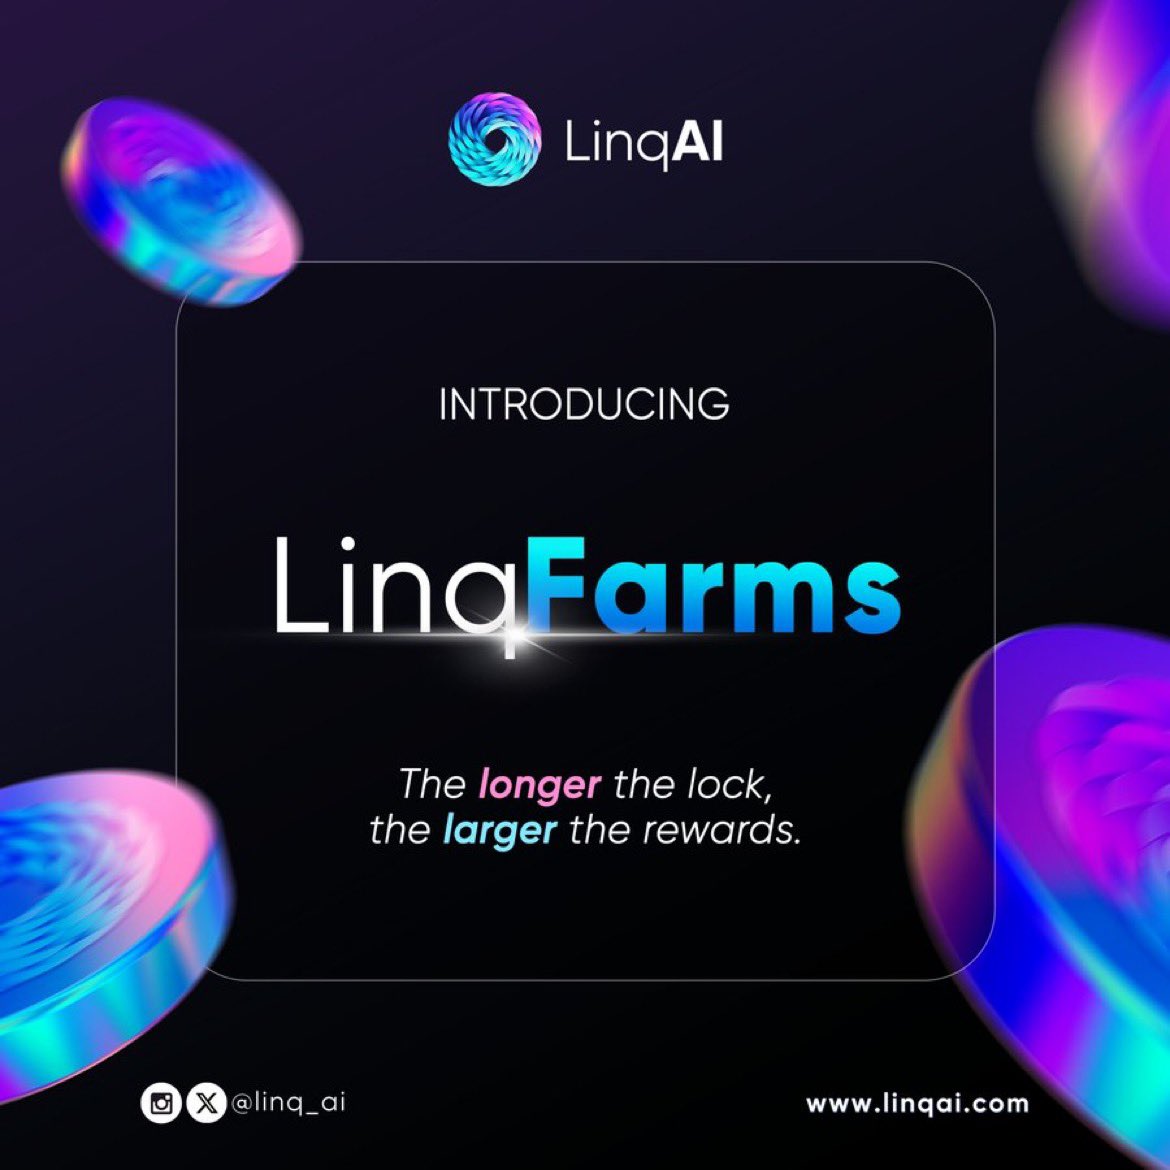 Yield farming in crypto is a great opportunity that lets you earn returns by leveraging your assets in DeFi  🌾 🚜 

With @linq_ai you can hold your $LNQ in a yield farm for a percentage APY based on locked tokens and chosen your preferred farm! 

#DeFi #YieldFarming #LinqAI